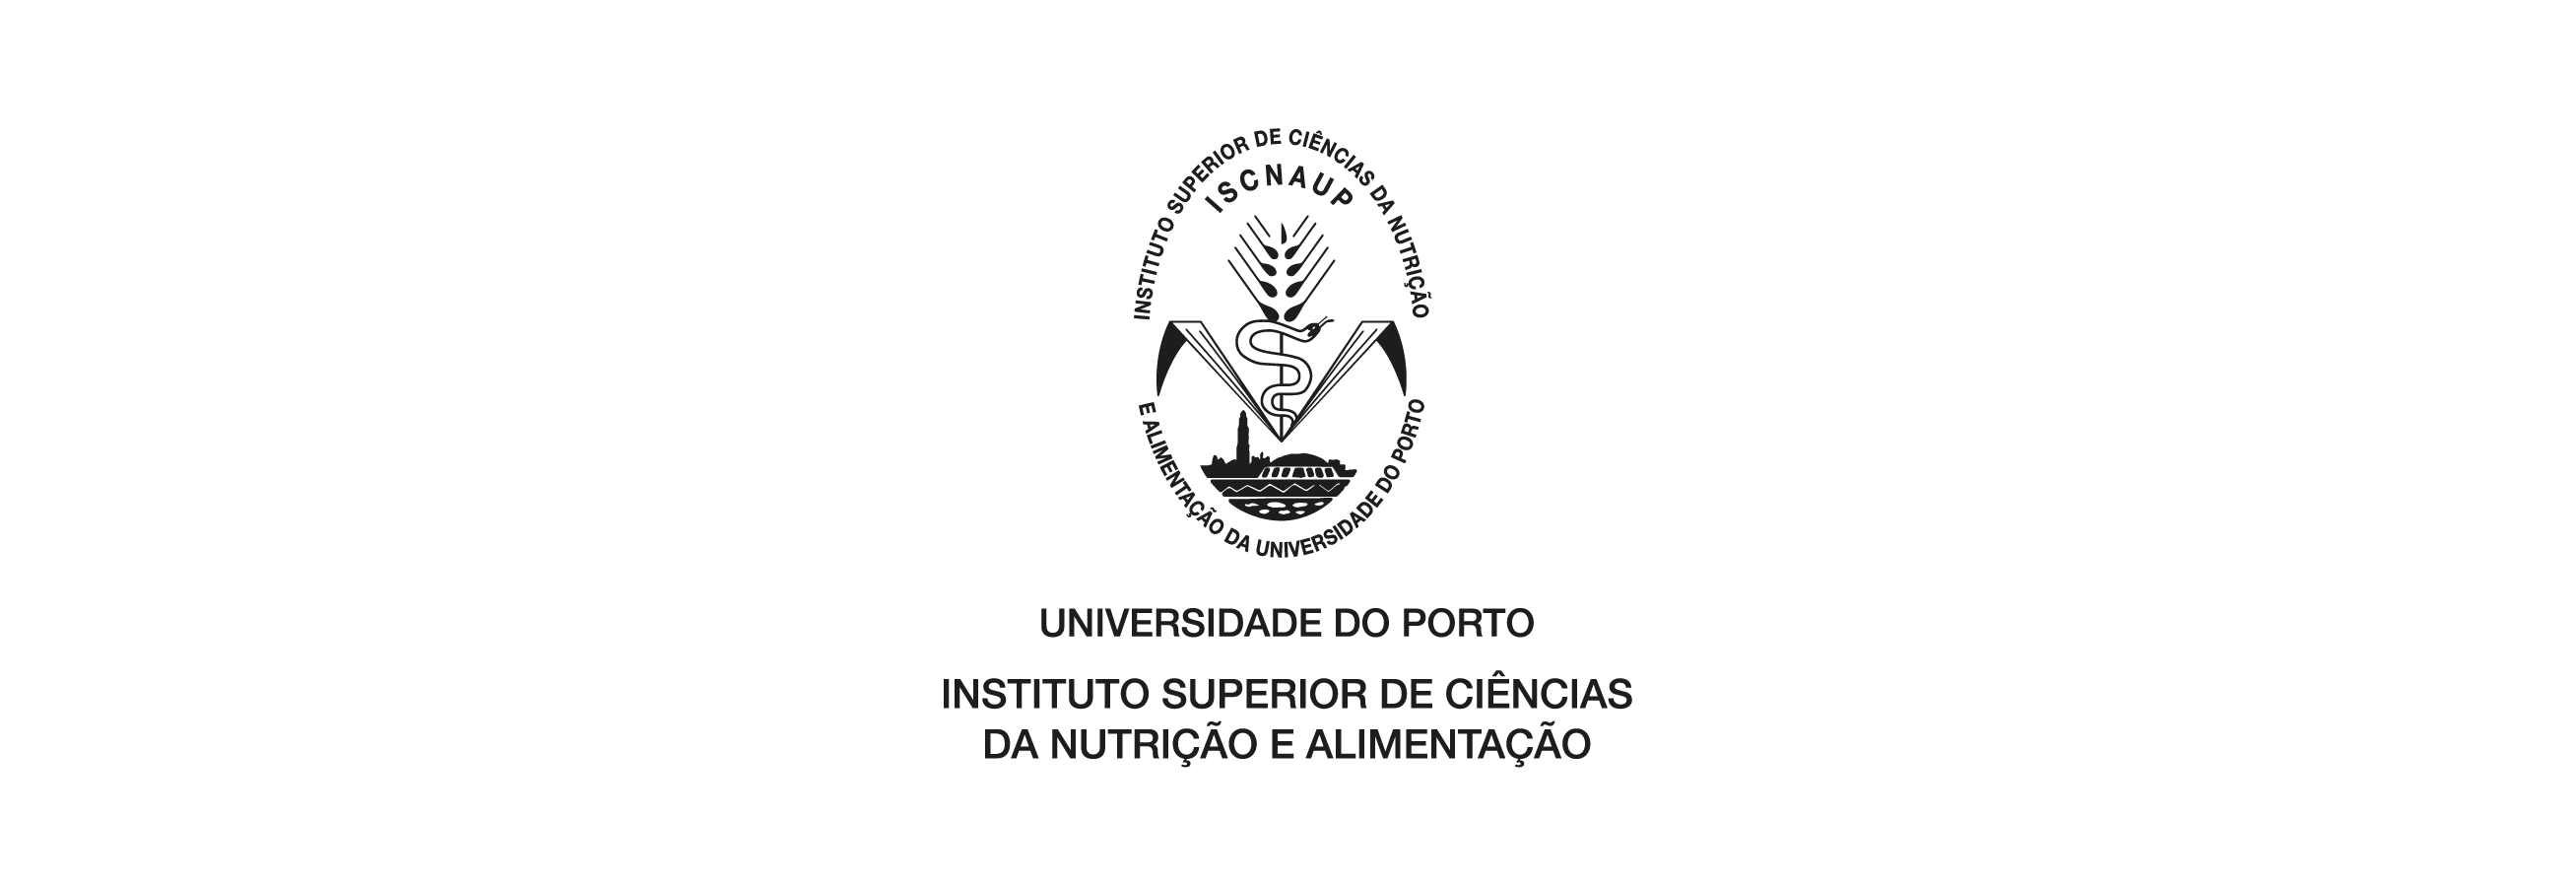 Logo - Institute of Nutrition and Food Sciences - University of Porto (1996)